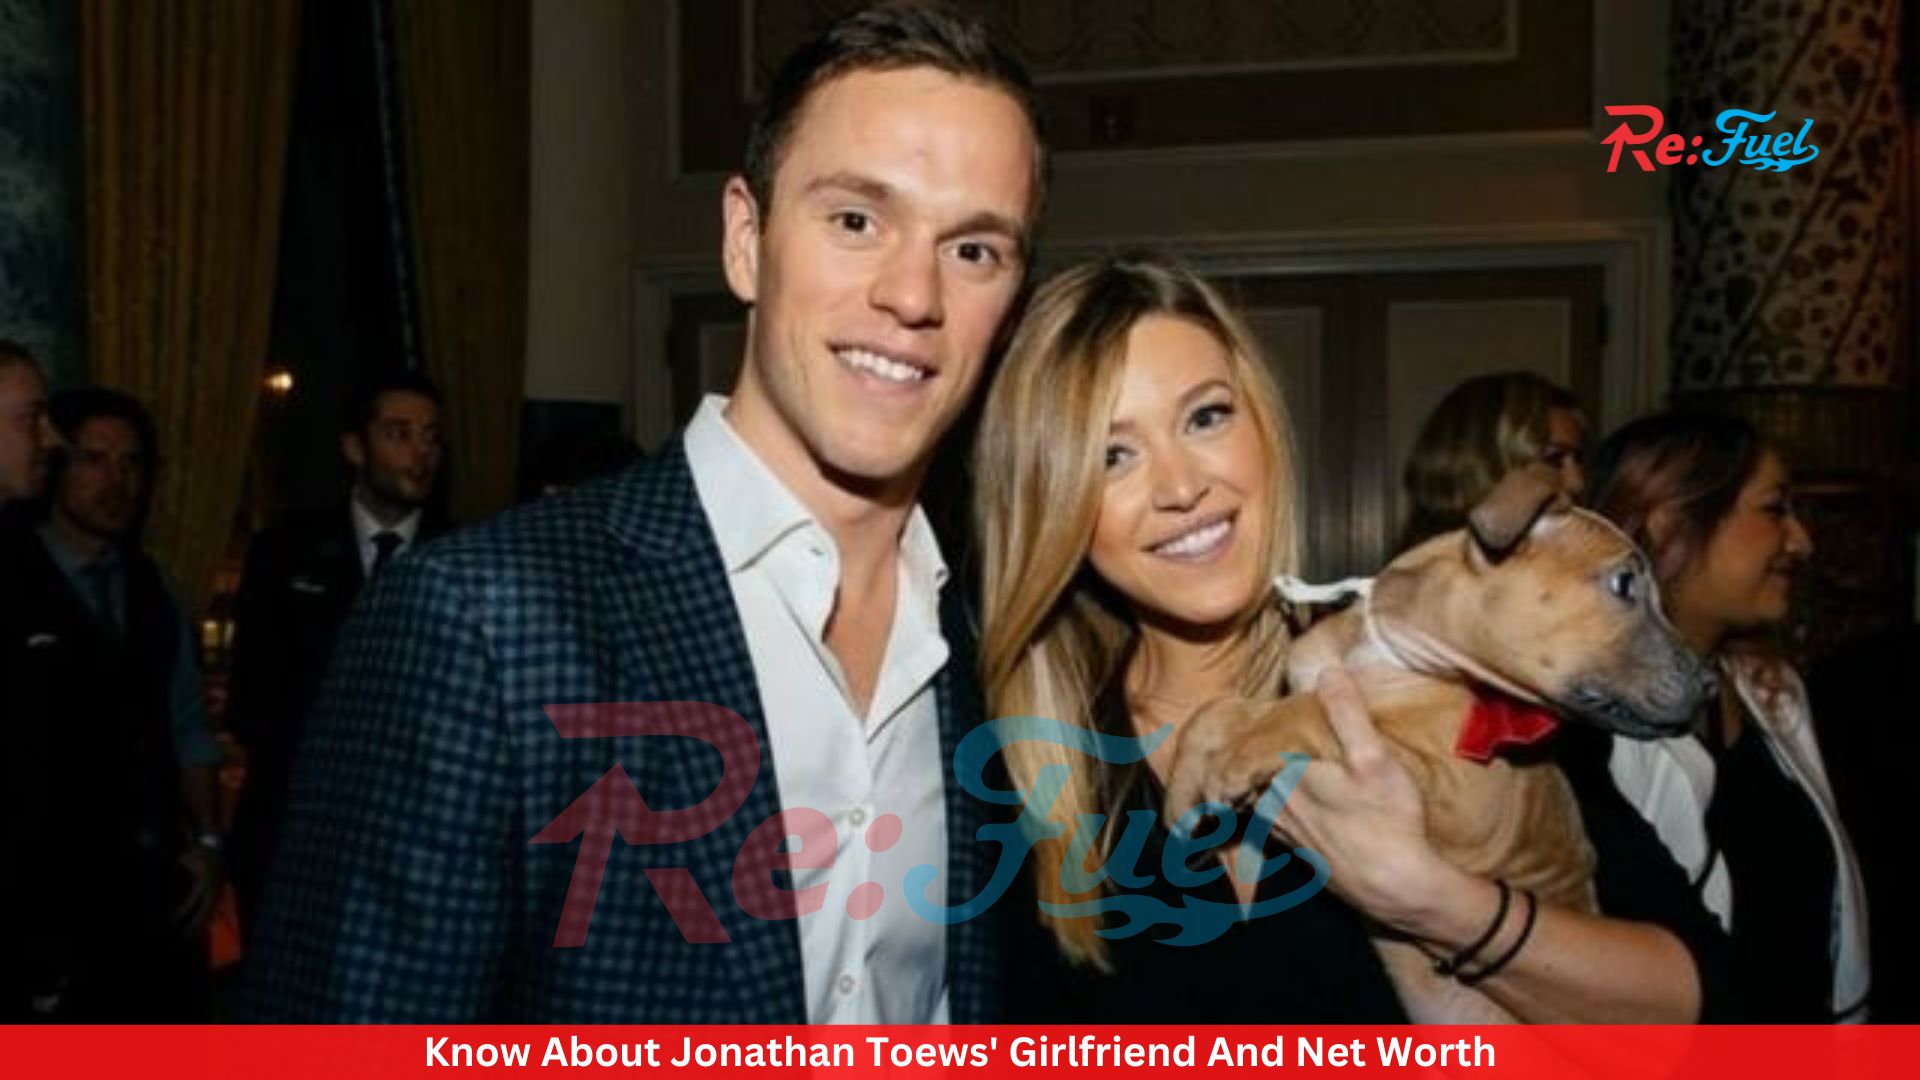 Know About Jonathan Toews' Girlfriend And Net Worth